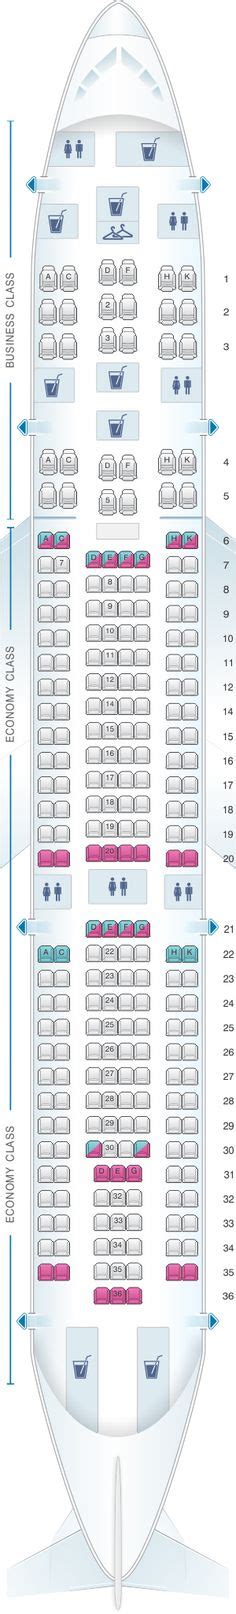 Seat Map And Seating Chart Avianca Airbus A330 200 300 Fleet Airbus